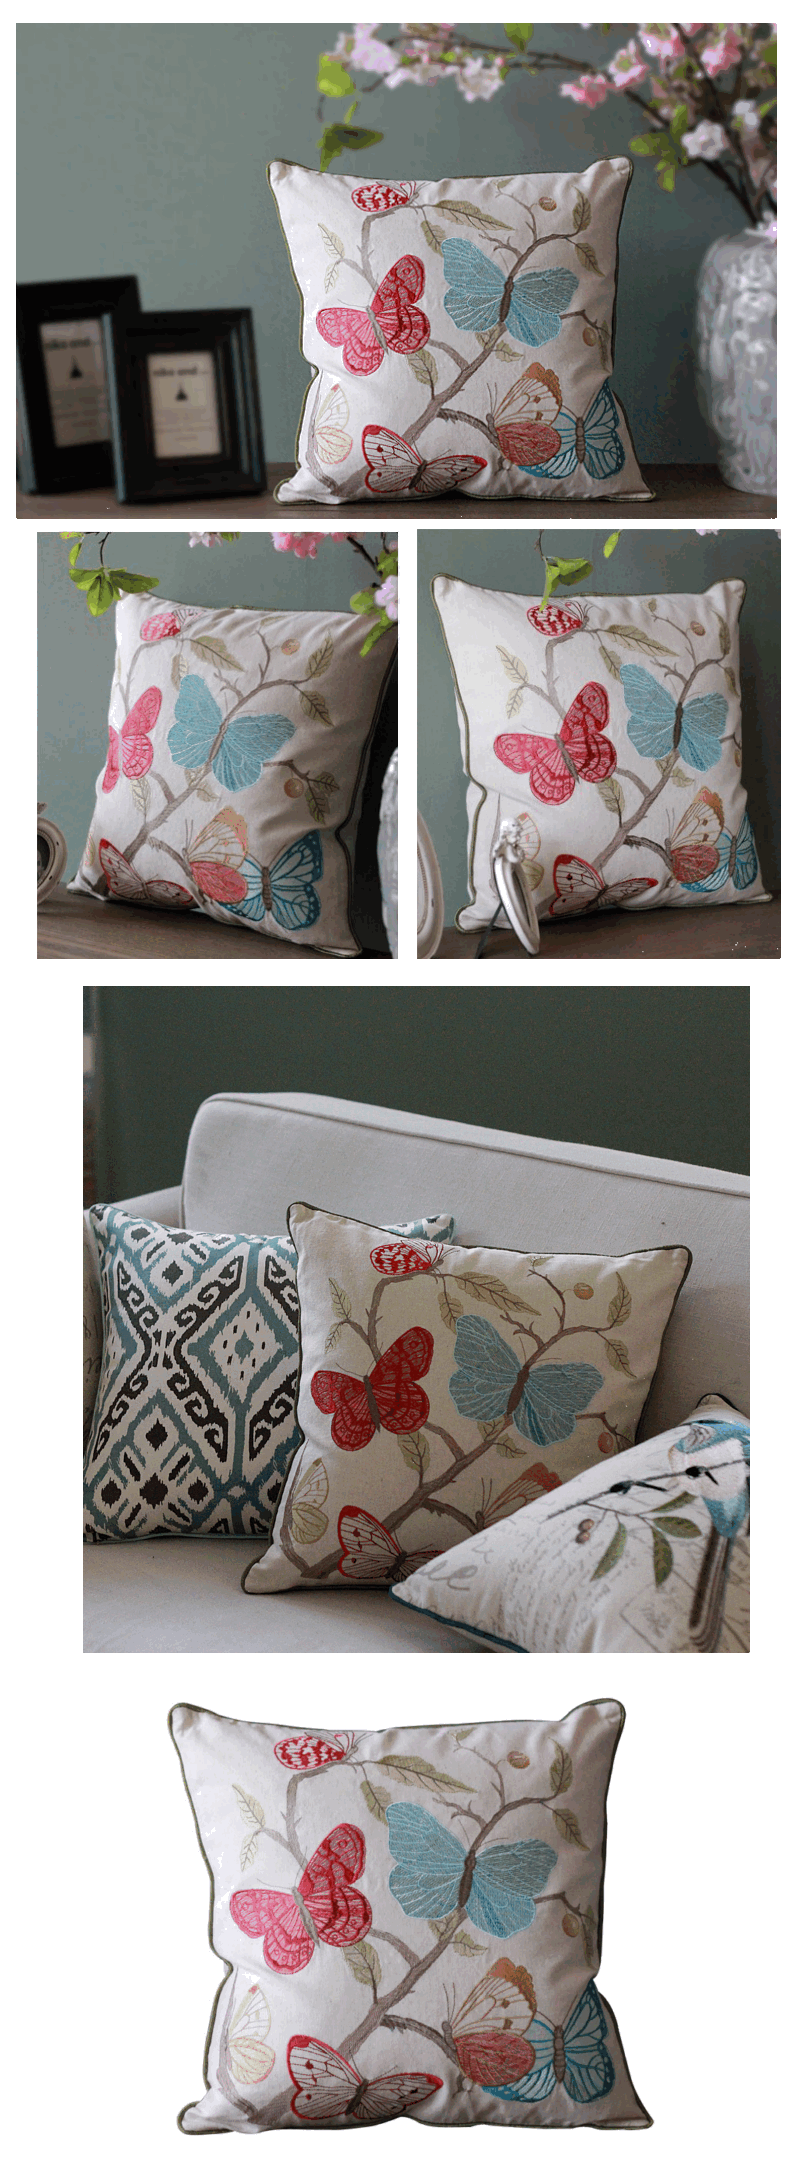 Embroider Butterfly Cotton and linen Pillow Cover, Decorative Throw Pillow